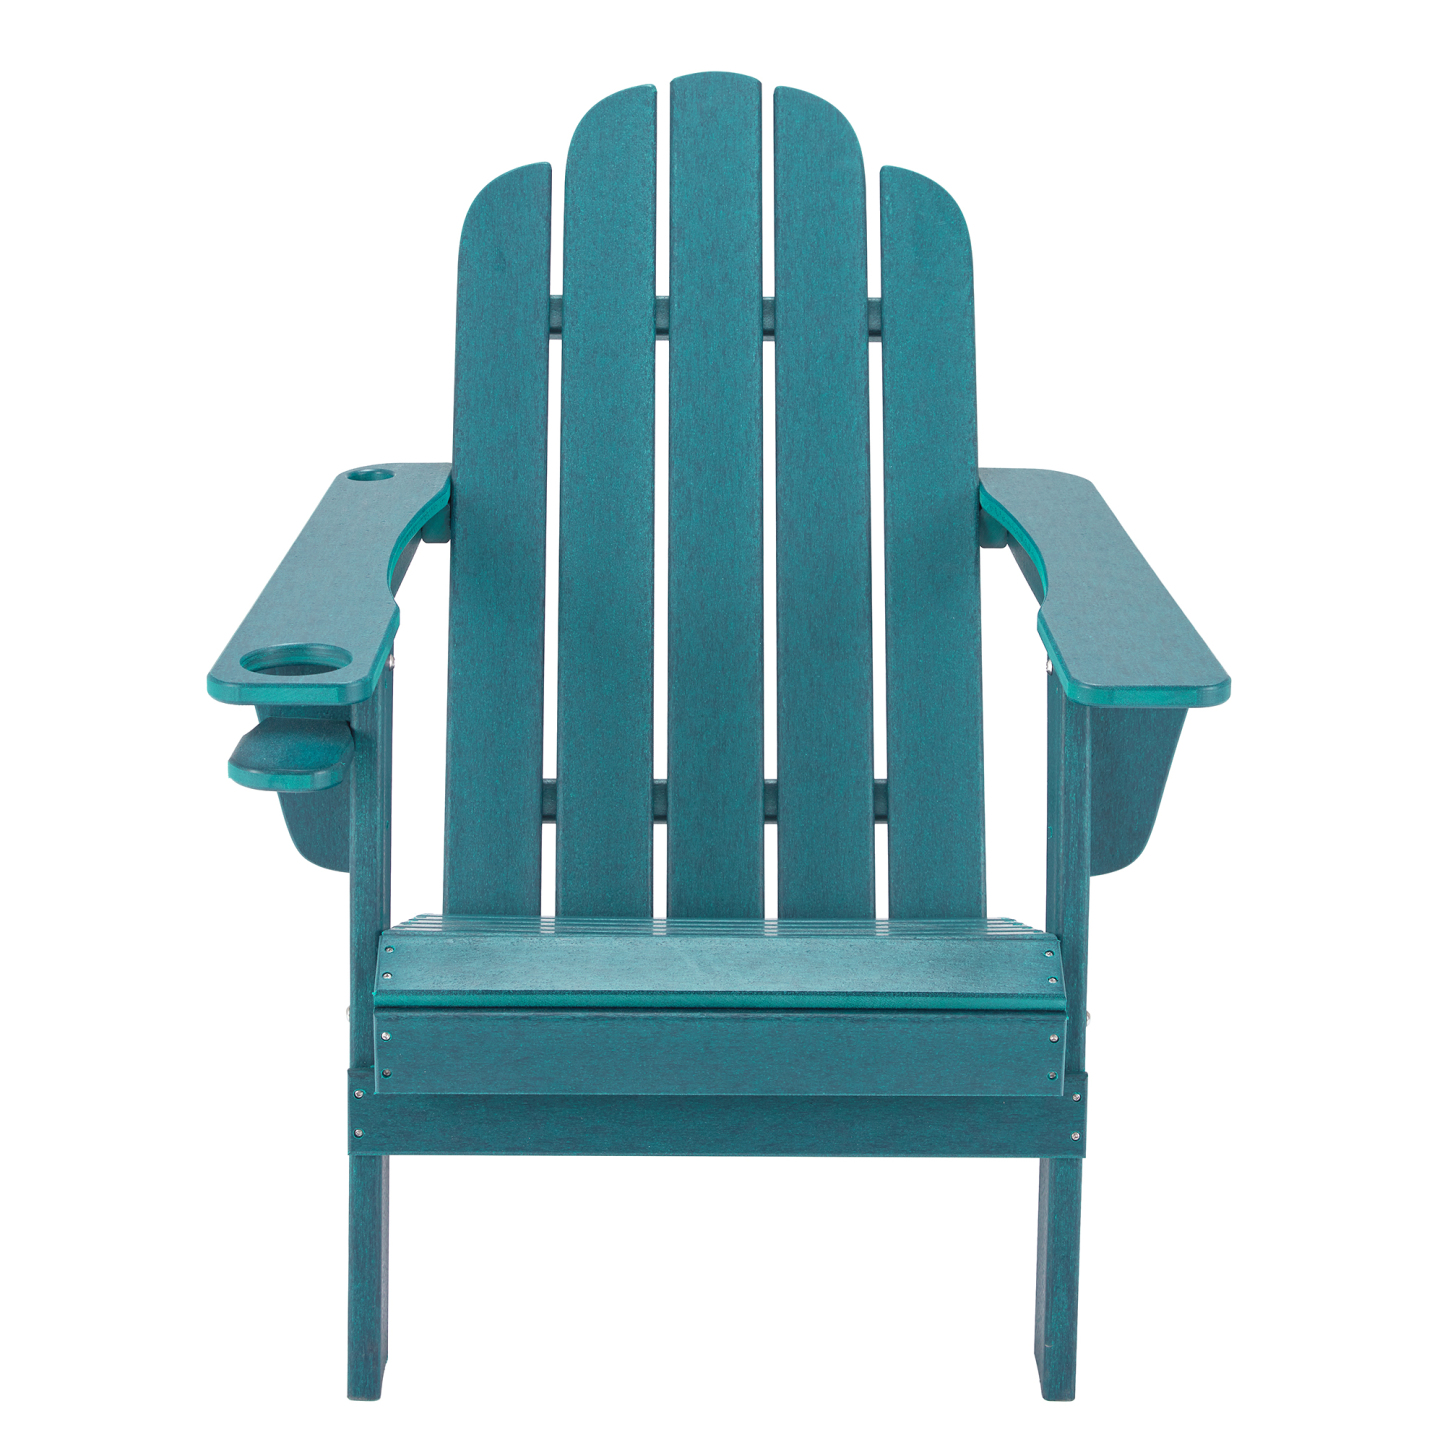 HDPE Plastic Adirondack Chair with Cup Holder and Umbrella Hole